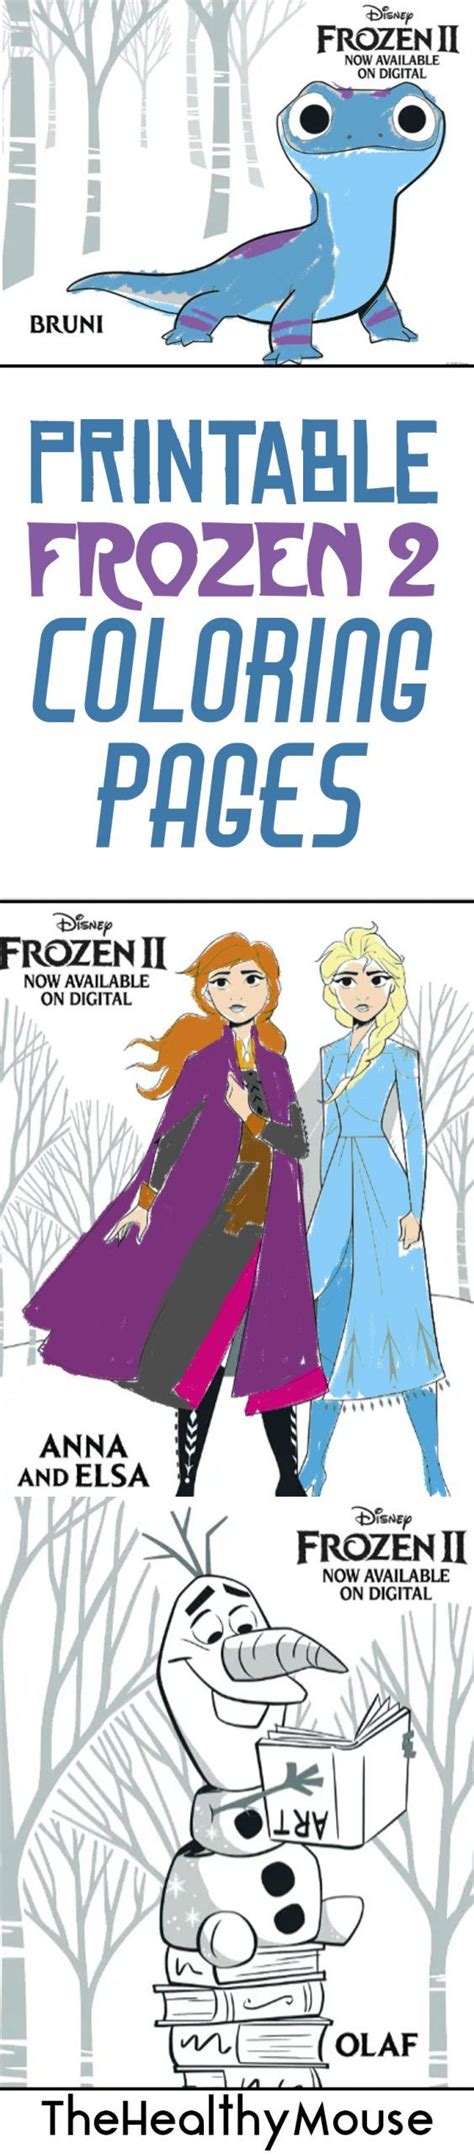 Have Some Disney Magic Indoors With These Free Printable Frozen Coloring Pages And Activity